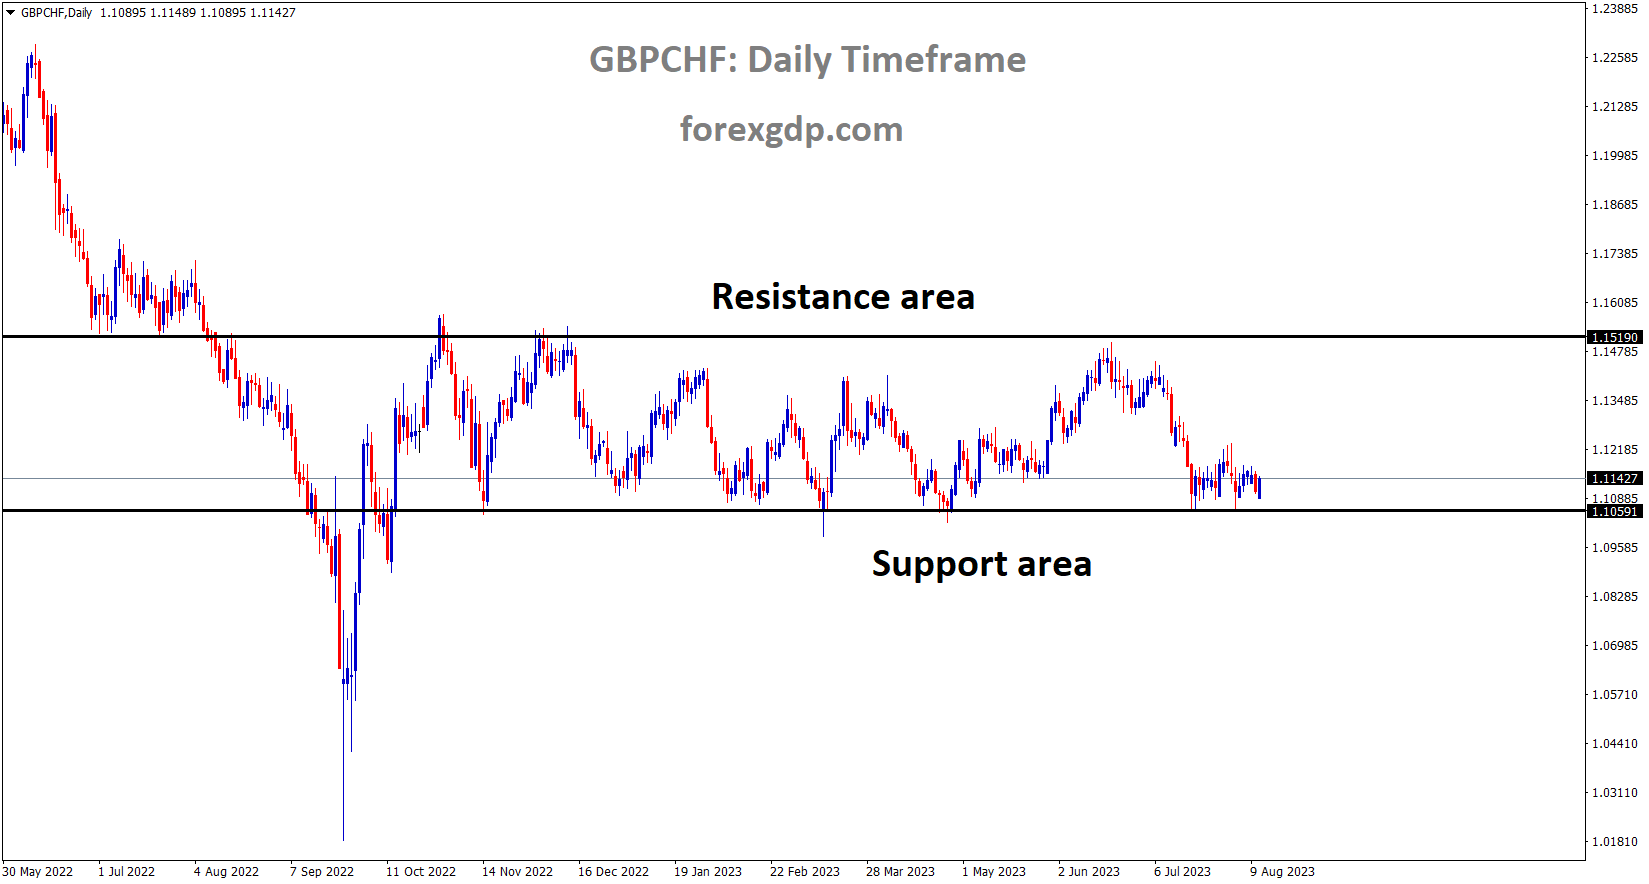 GBPCHF is moving in the Box pattern and the market has reached the horizontal support area of the pattern